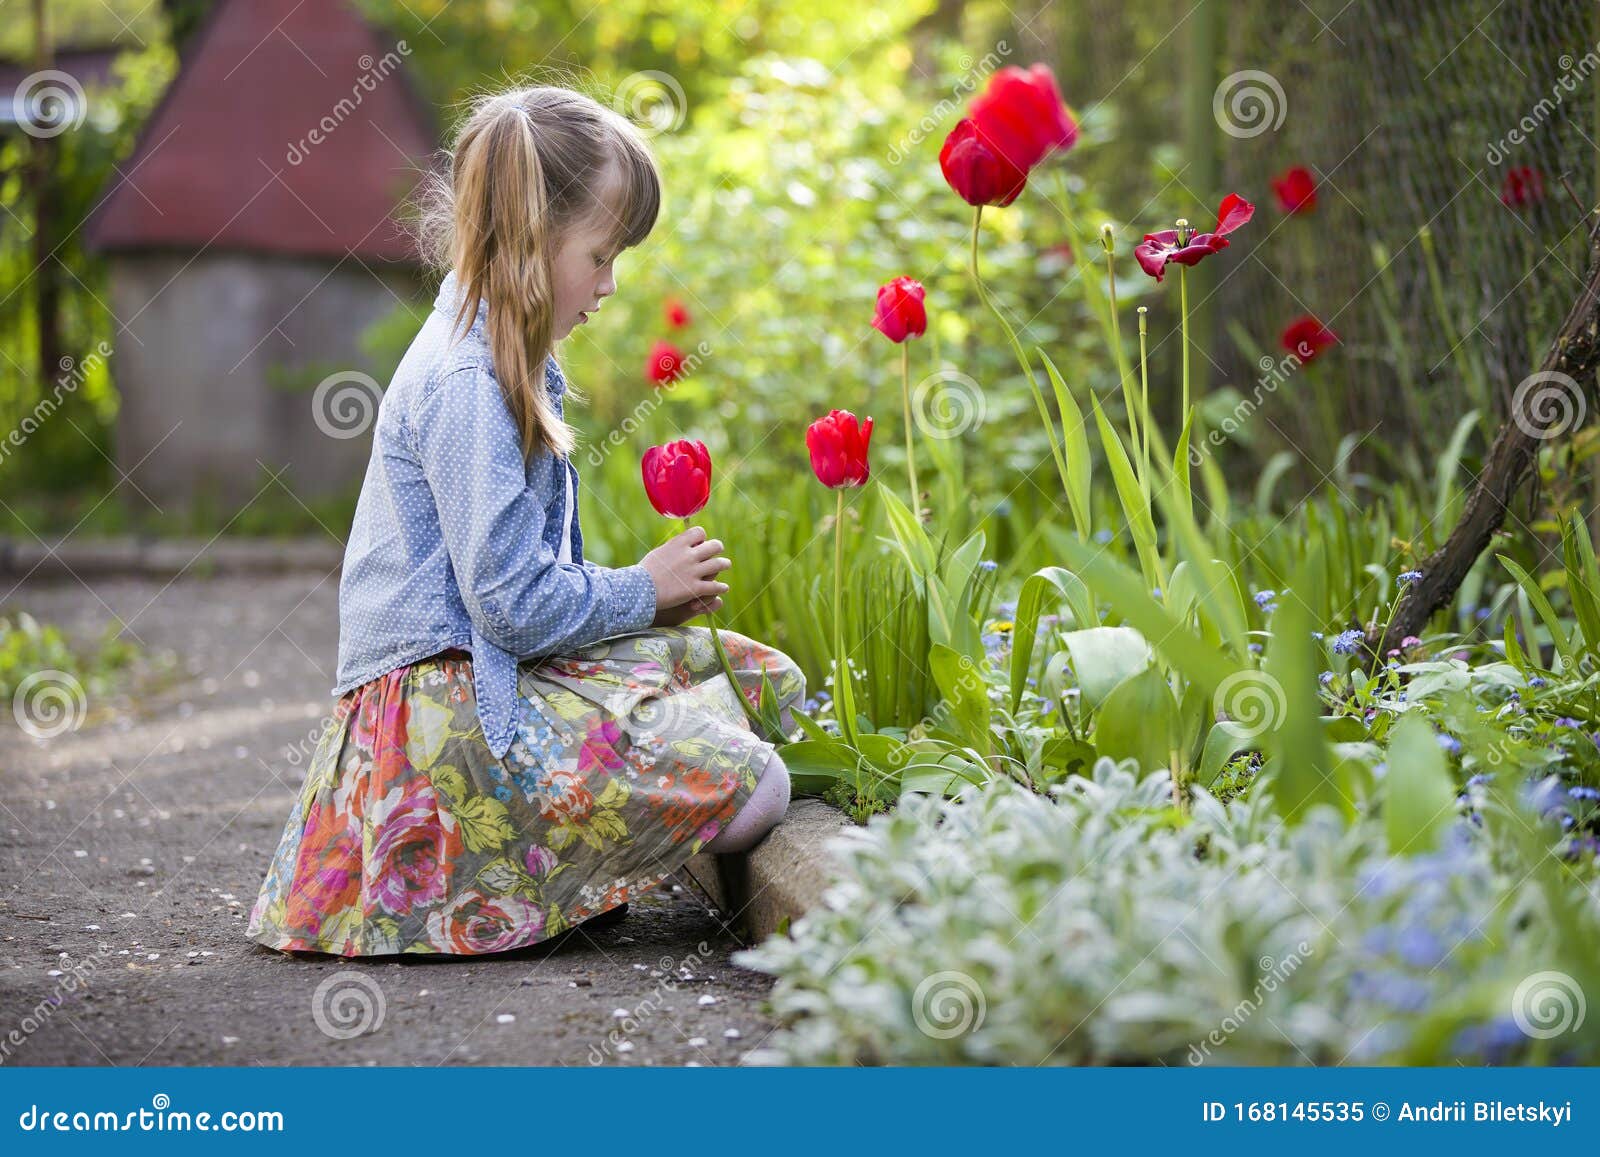 Profile of Cute Pretty Child Girl Outdoor at Flower Bed Looking at ...